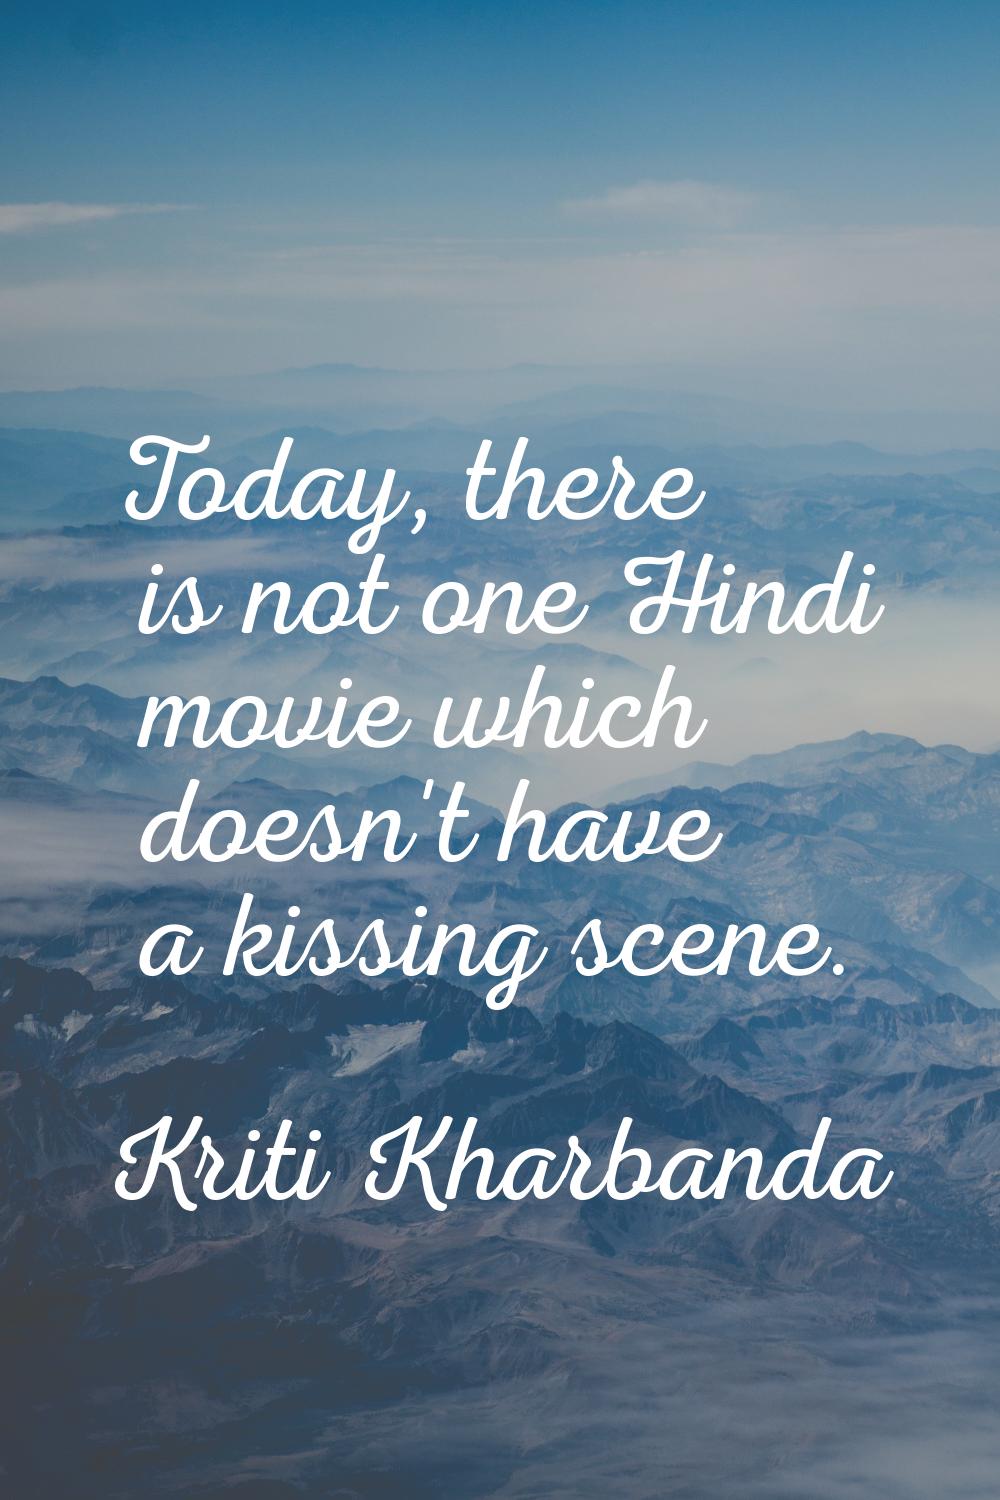 Today, there is not one Hindi movie which doesn't have a kissing scene.